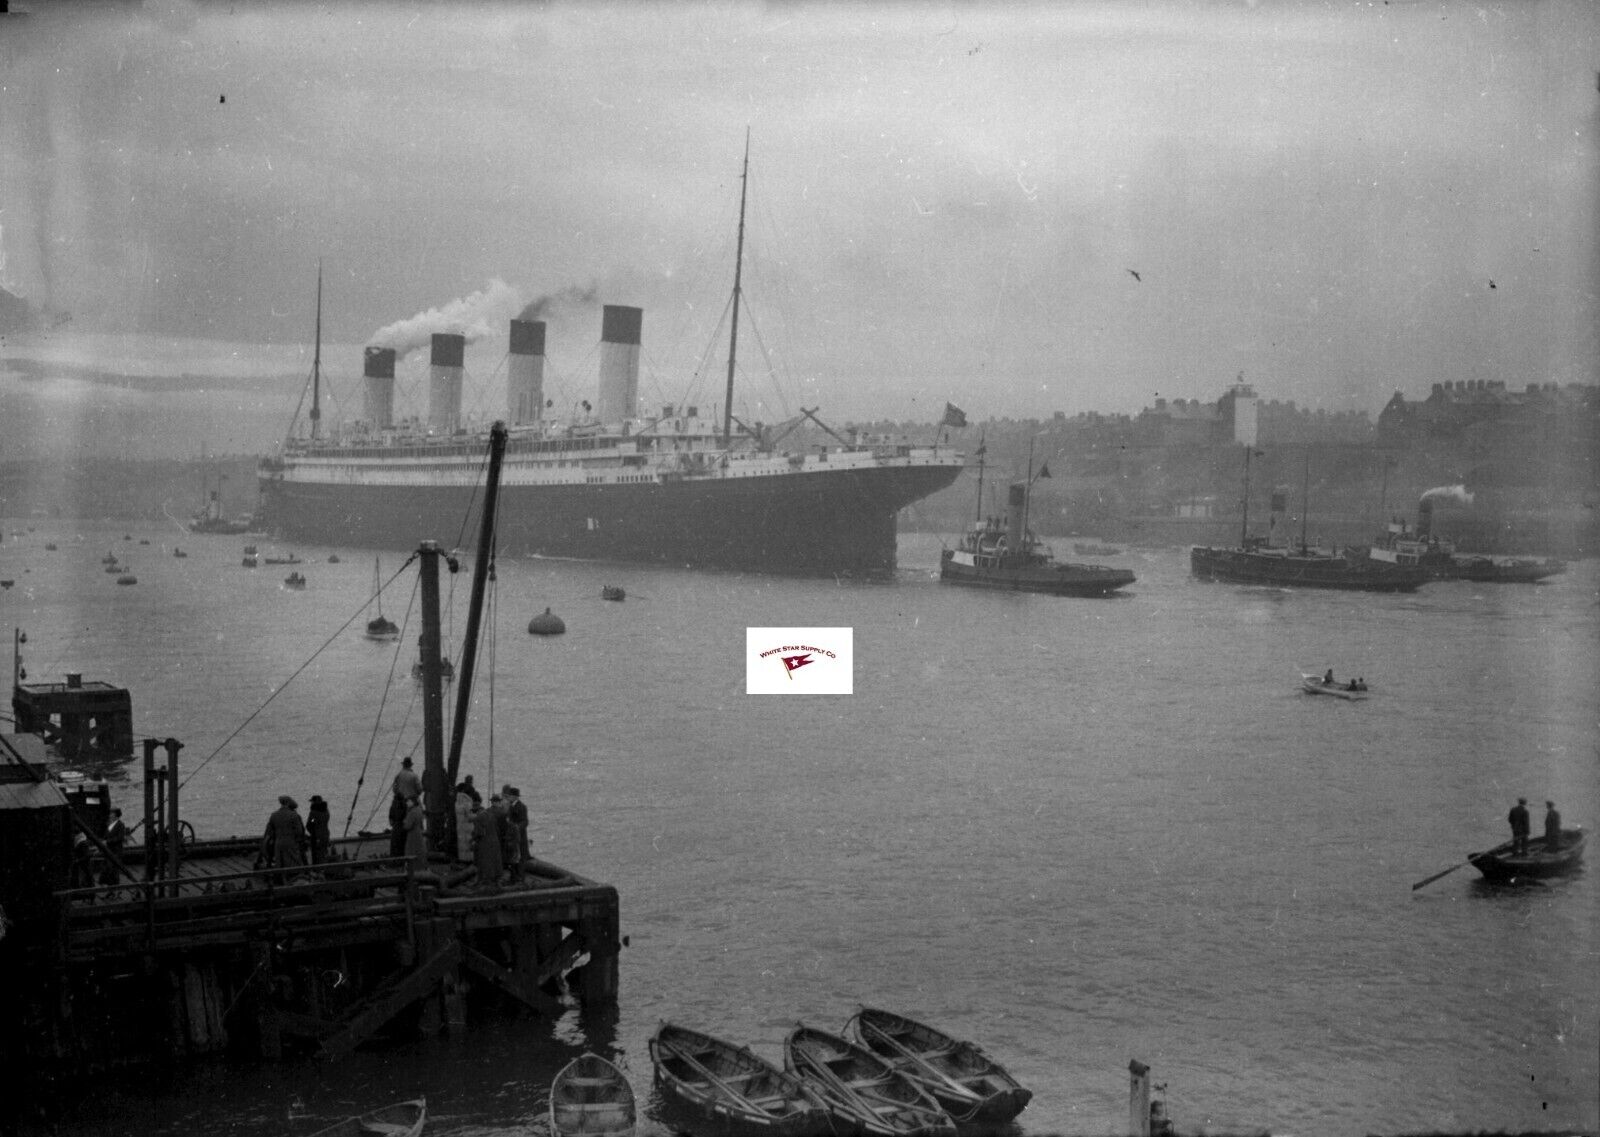 RMS OLYMPIC, TITANIC'S SISTER 1935 HEADED TO JARROW TO BE SCRAPPED, REPRINT